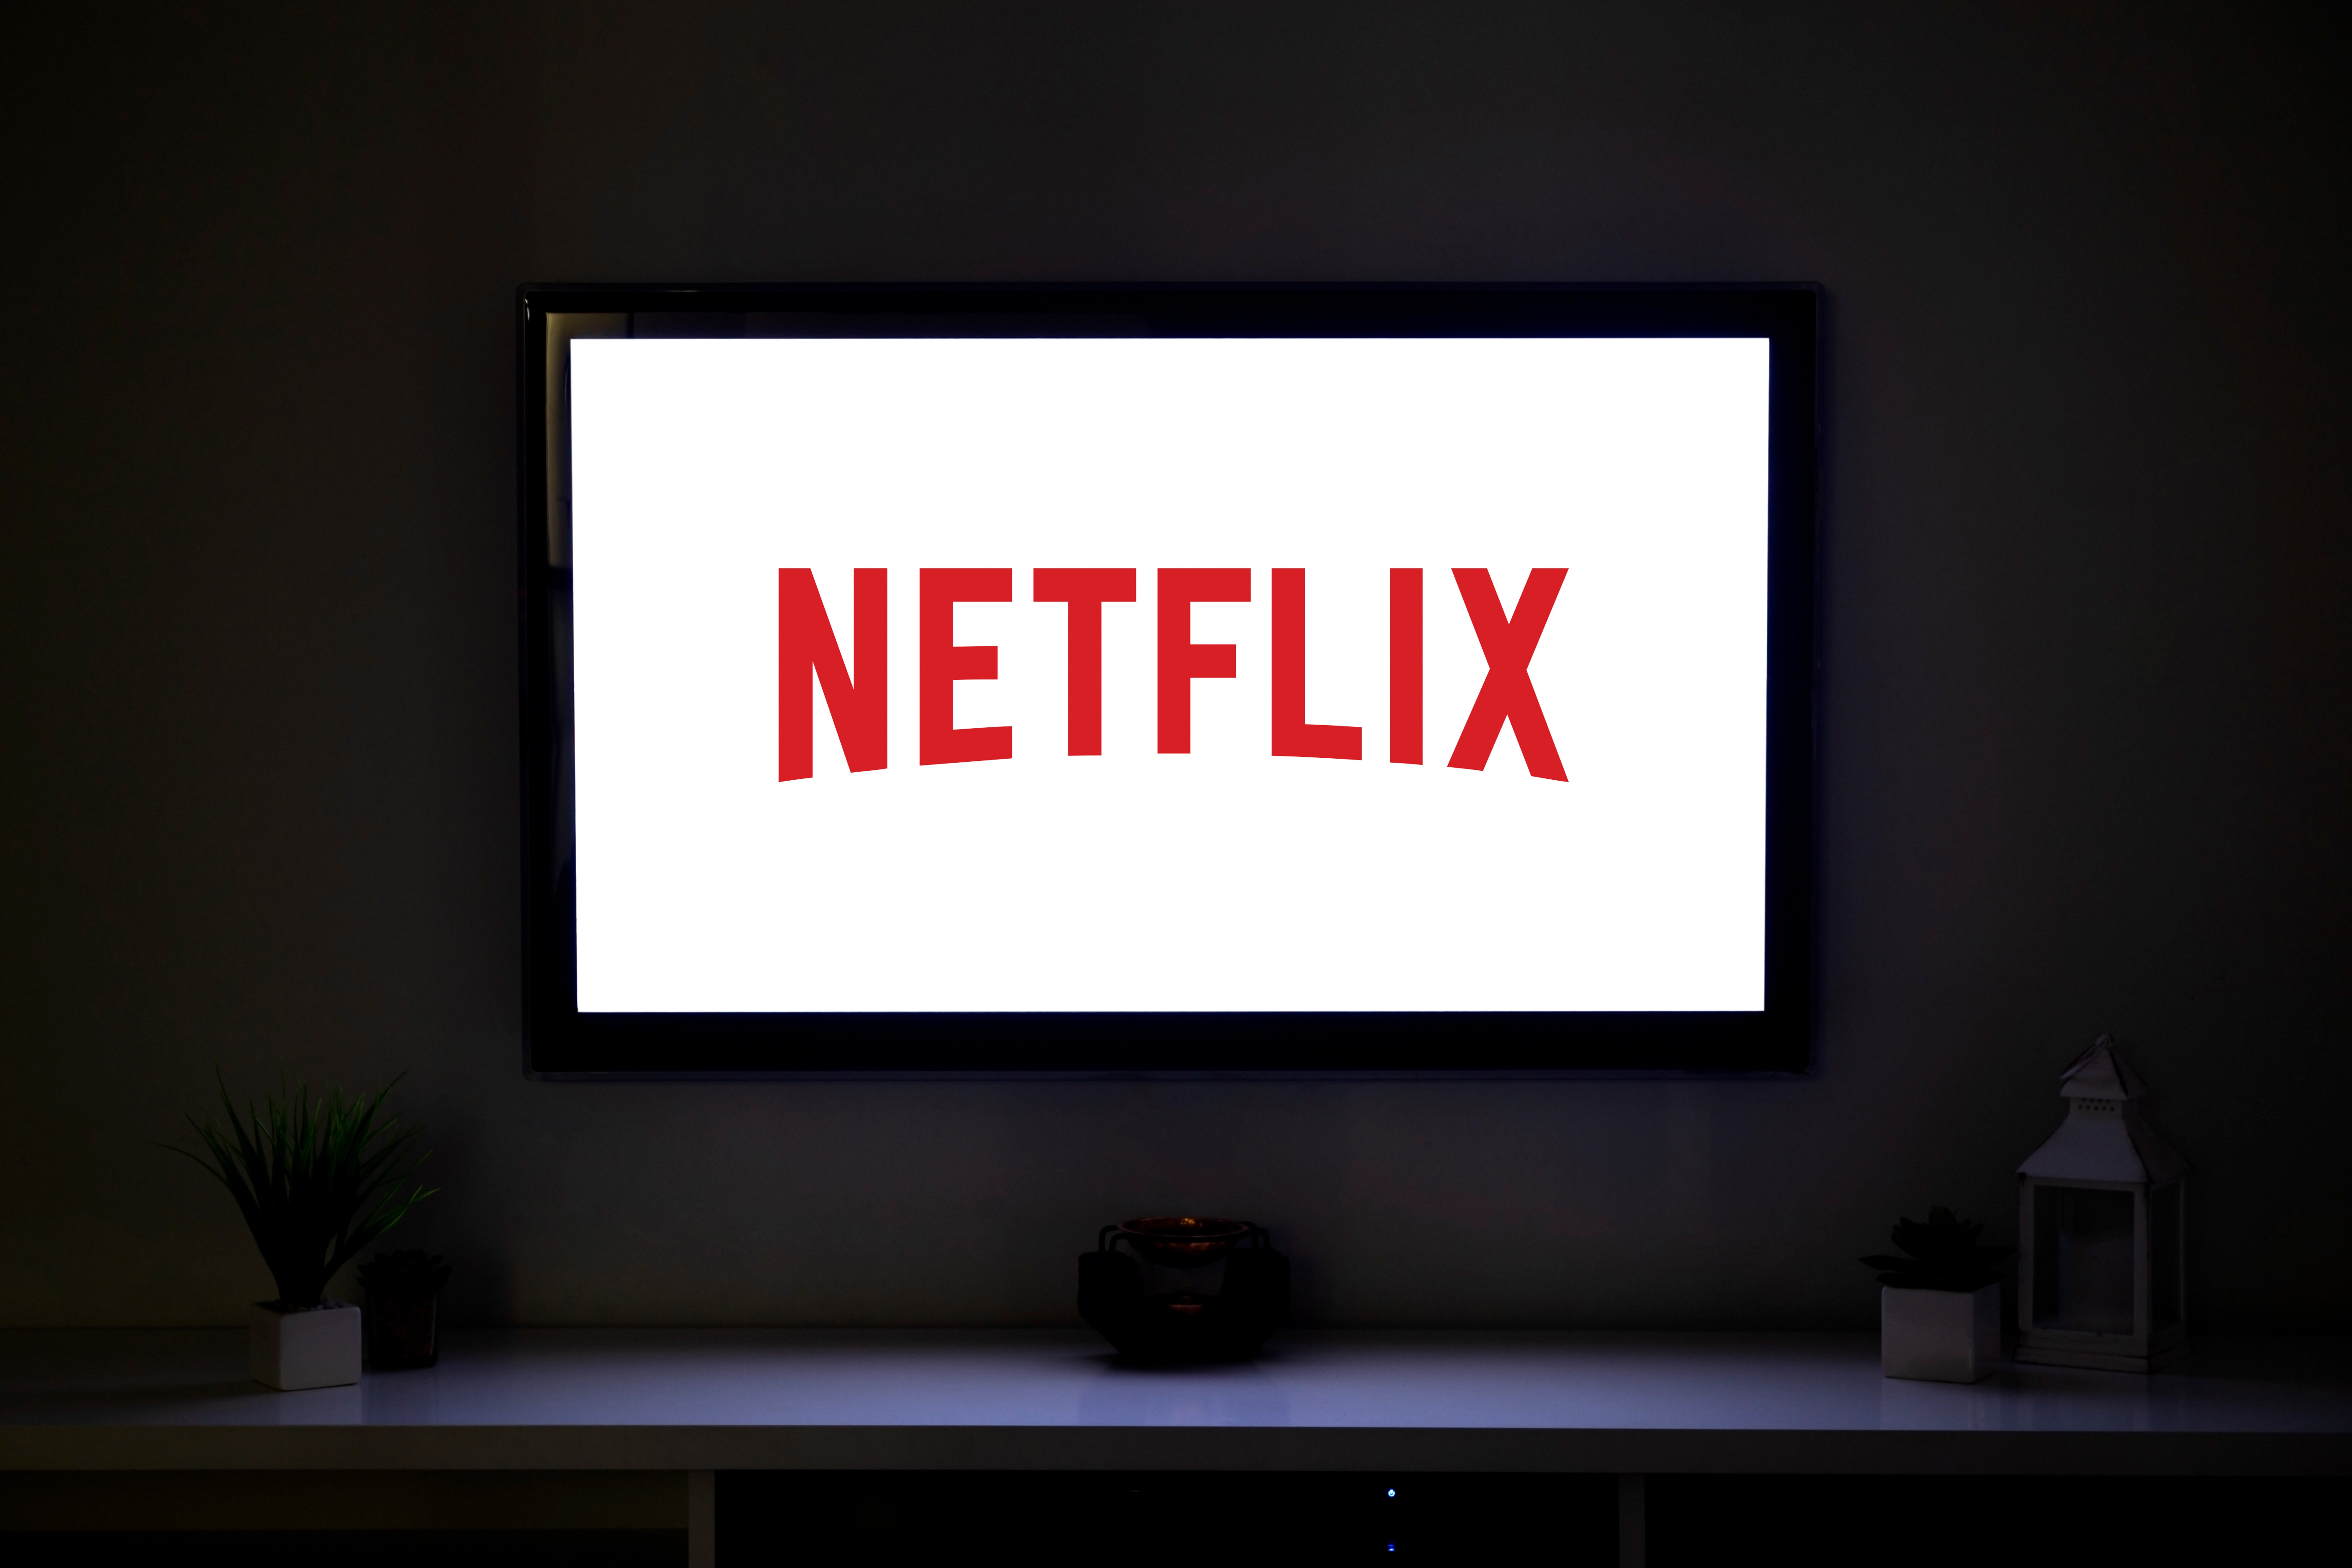 Netflix Q3 Earnings Highlights: Revenue, Subscribers Beat Estimates, Company Throws Shade At Streaming Rivals